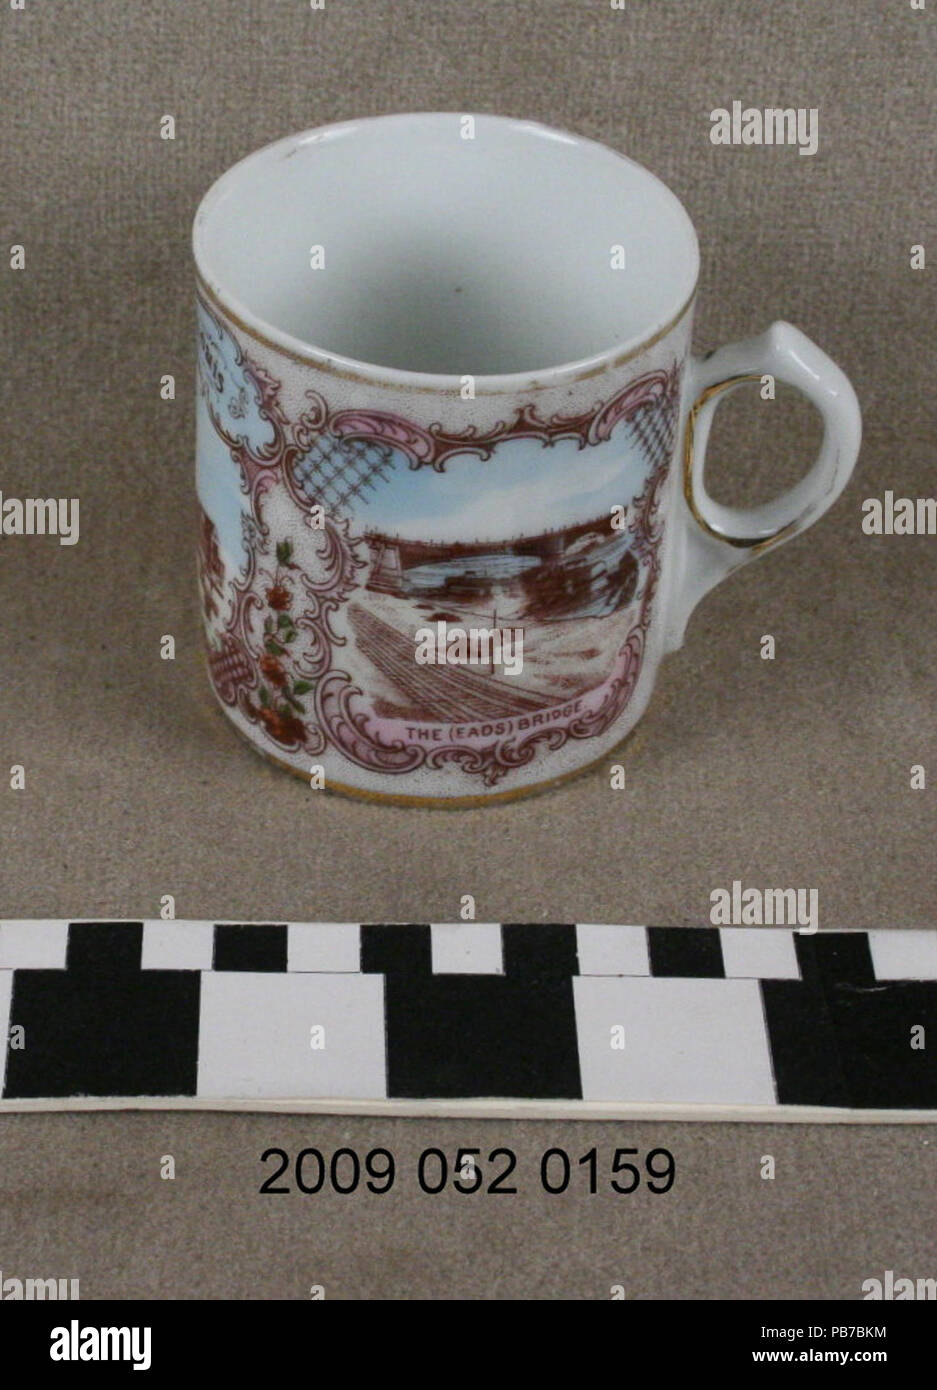 1127 Official Souvenir Mug From the 1904 World's Fair Showing Color Images of Three St. Louis Landmarks Stock Photo